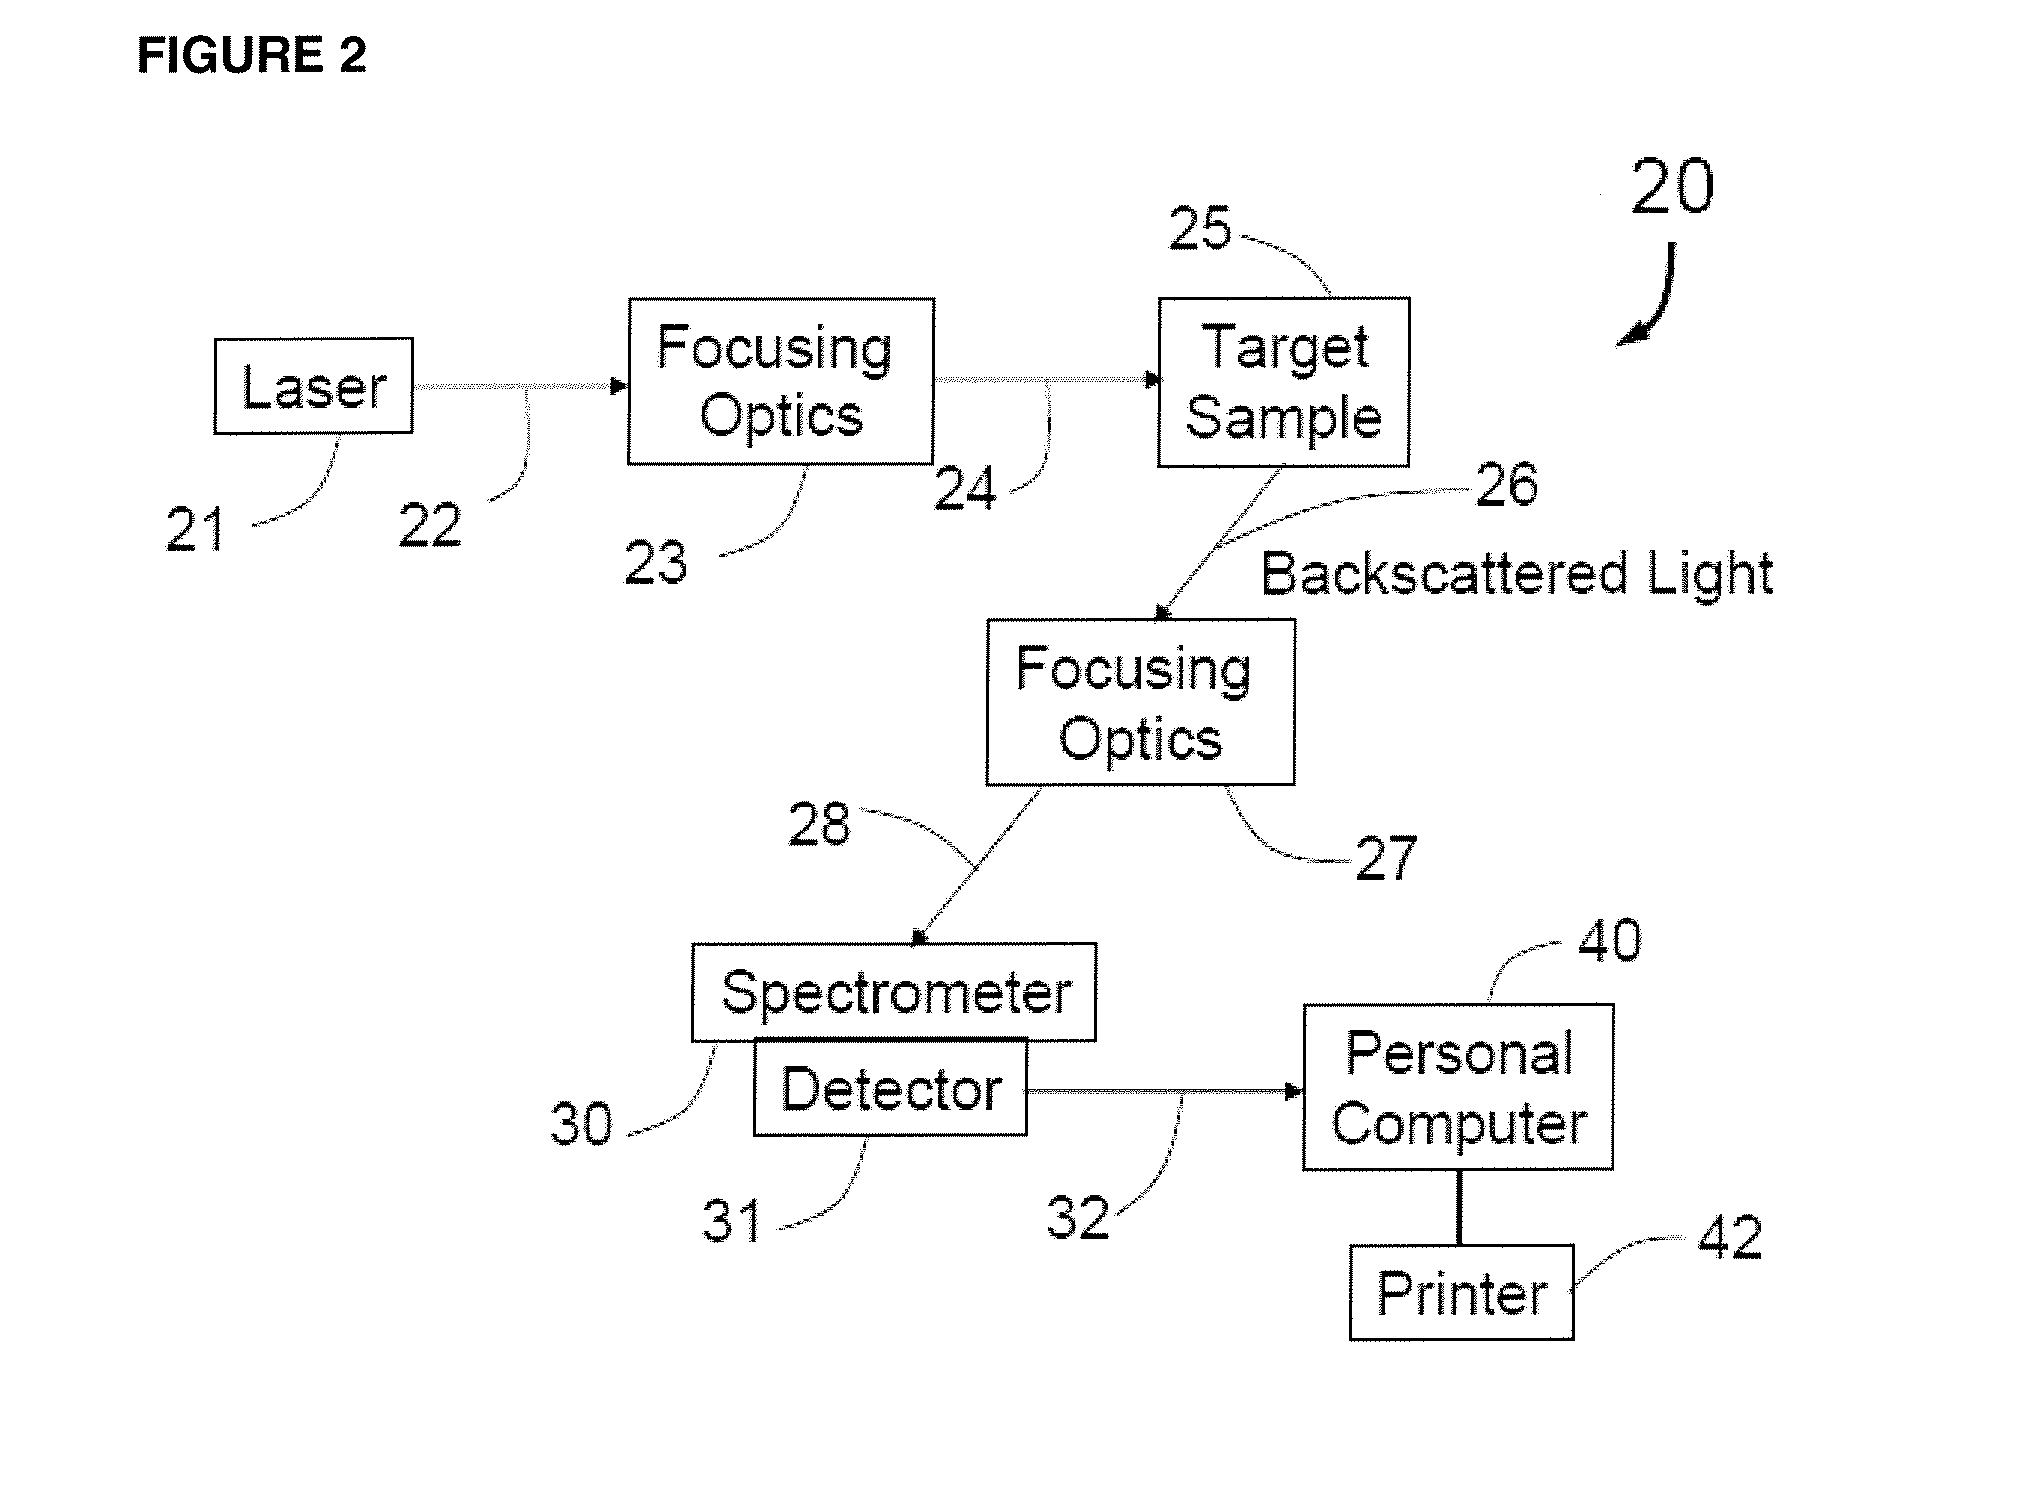 Methods for detecting organisms and enzymatic reactions using raman spectroscopy and aromatic compounds comprising phosphate